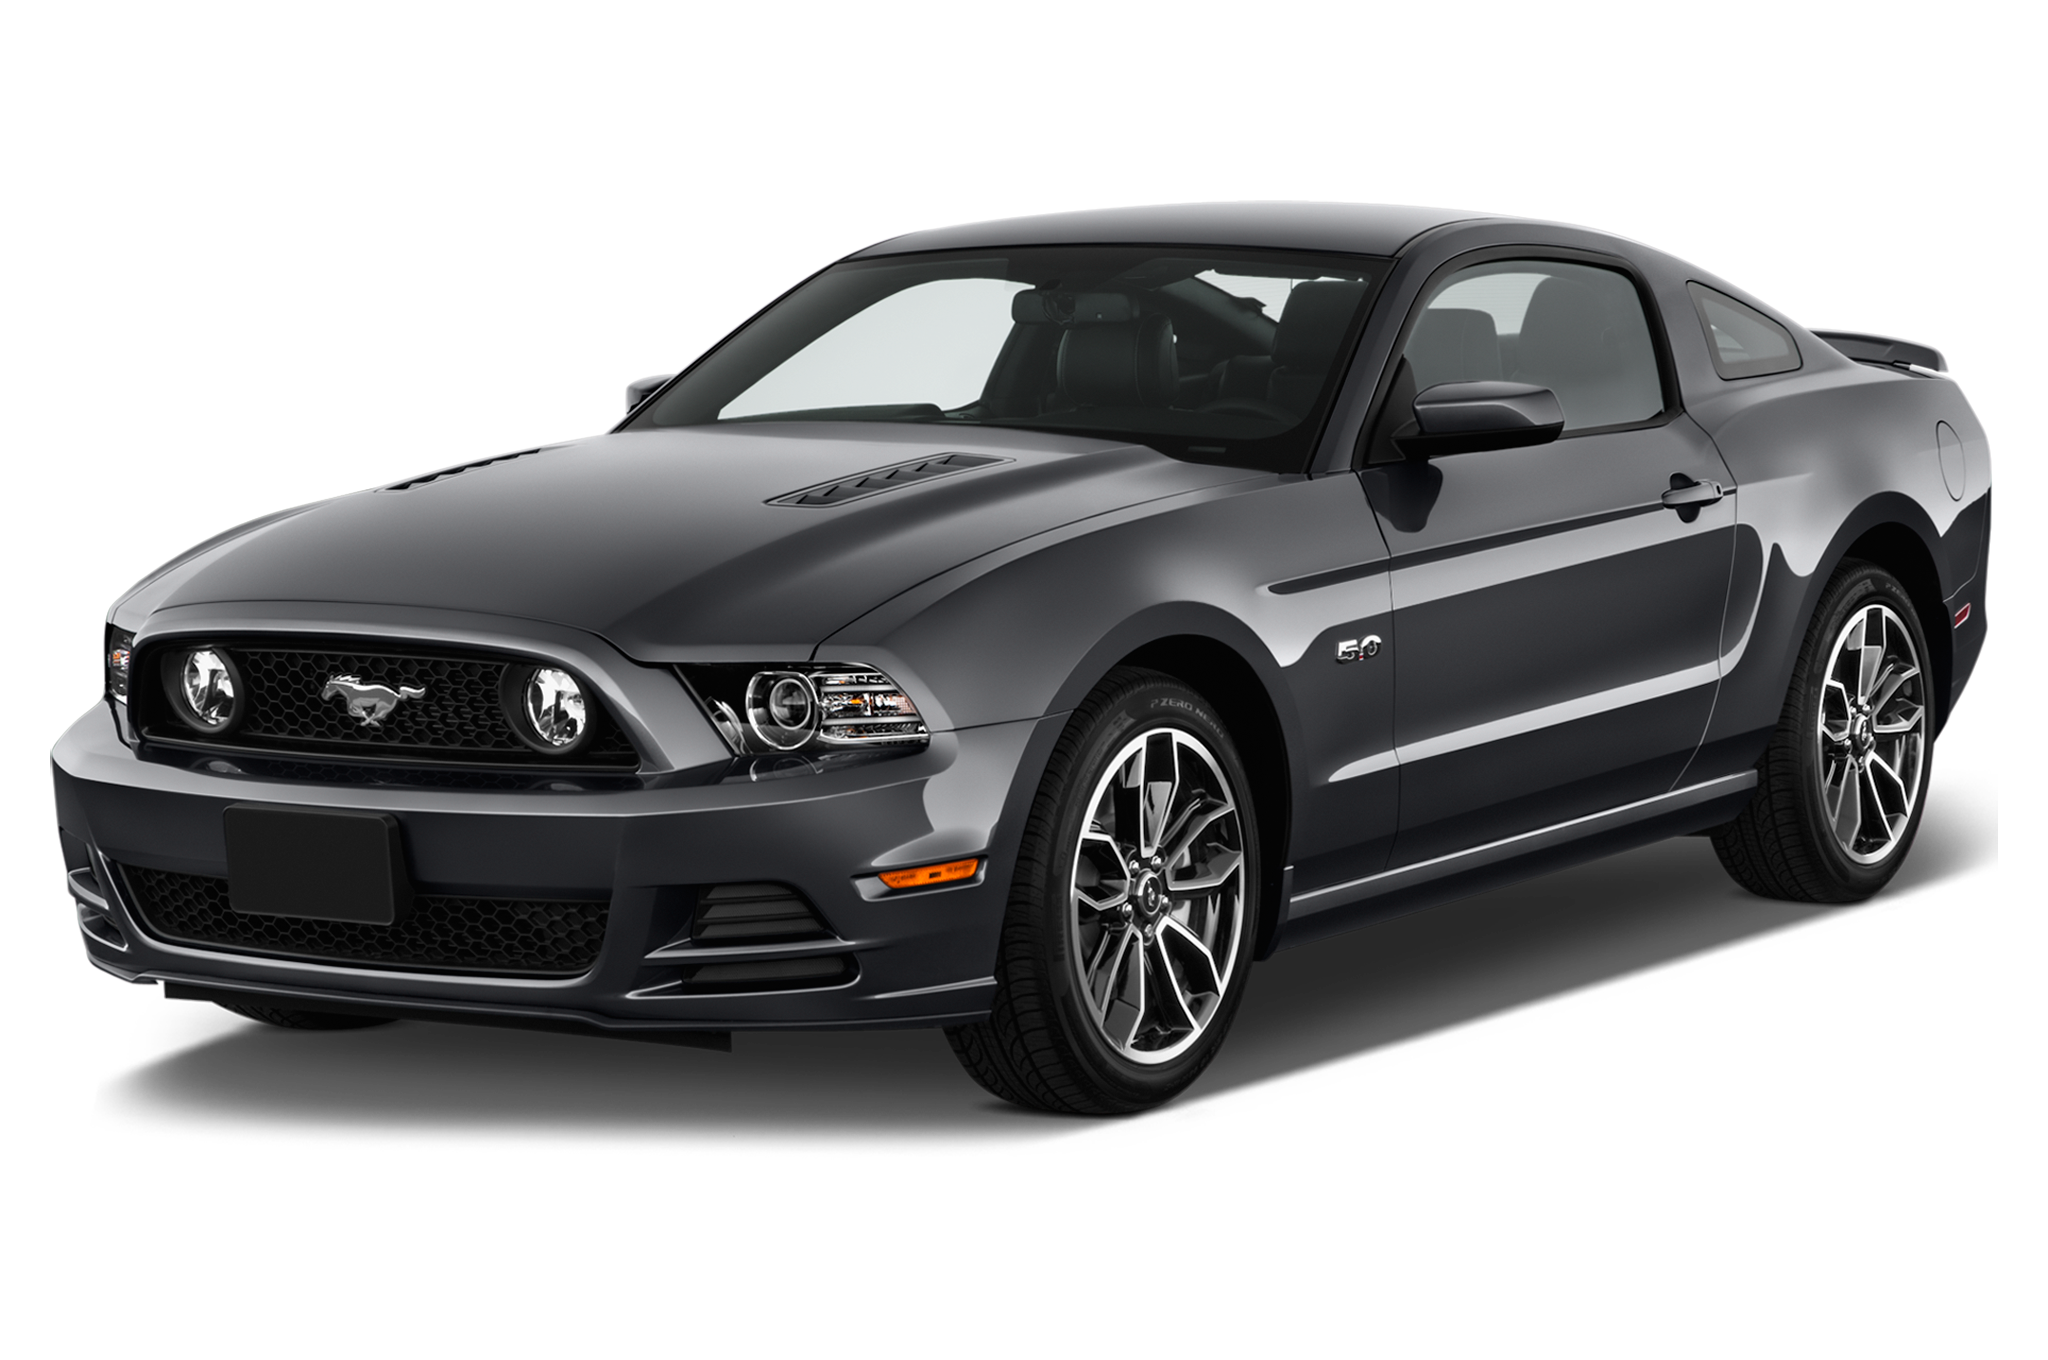 Ford Mustang PNG -Datei